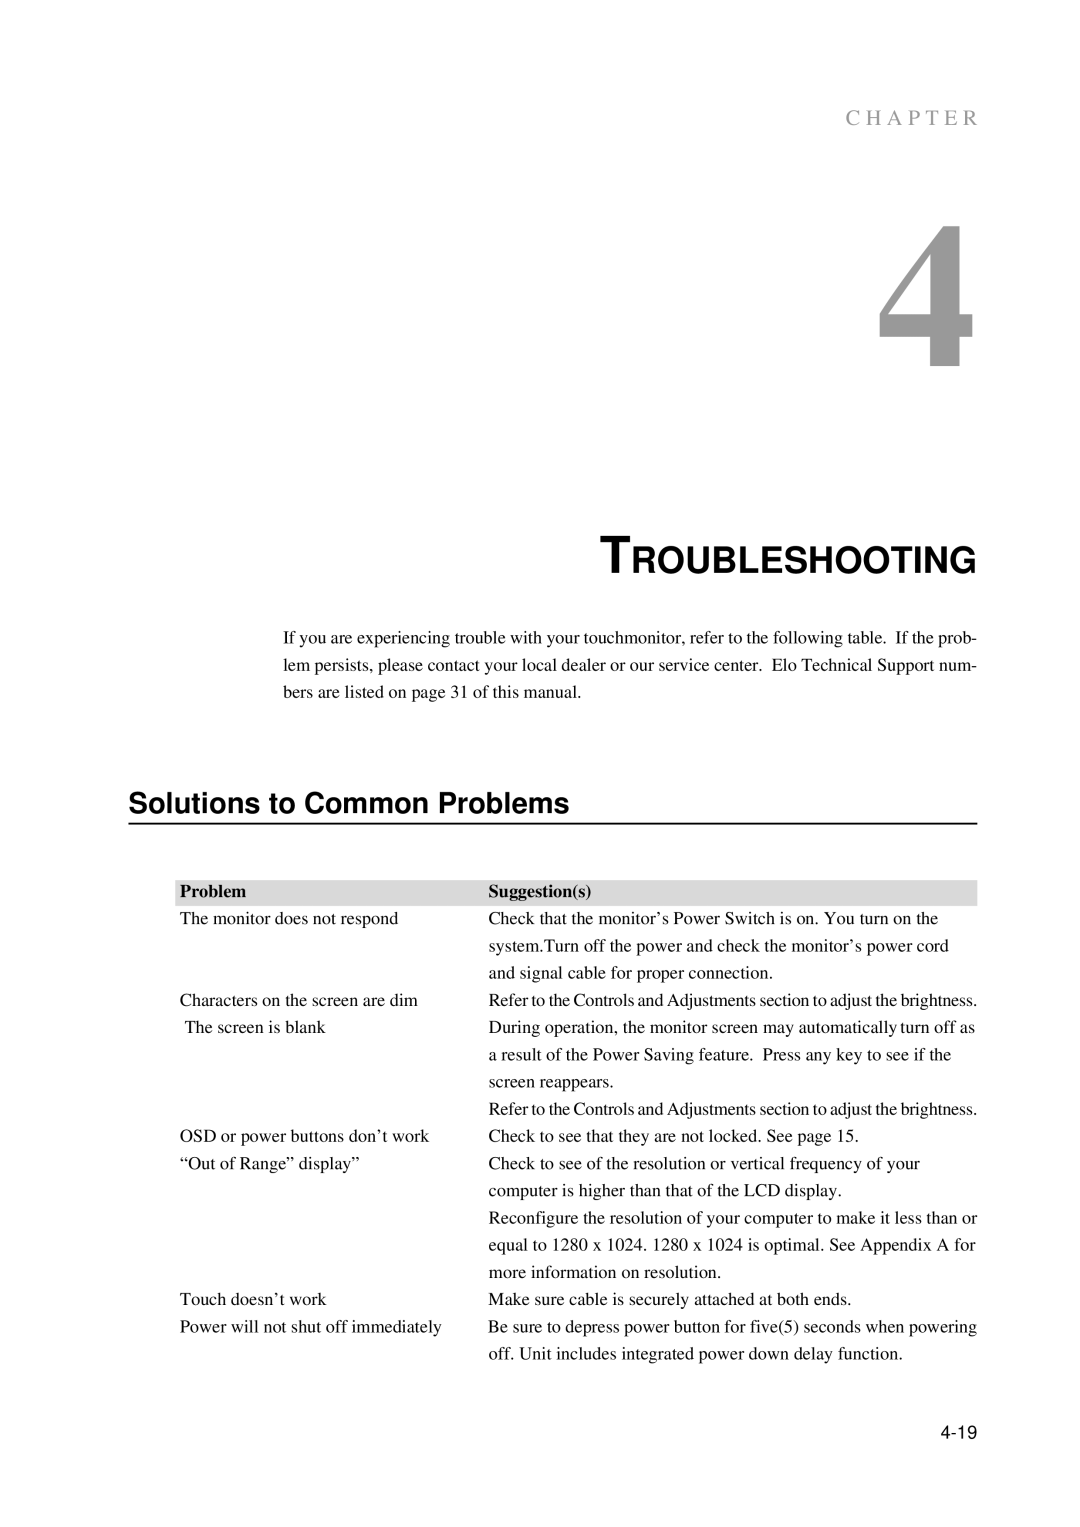 Elo TouchSystems 5000 Series, E791522 manual Troubleshooting, Solutions to Common Problems, Problem Suggestions 